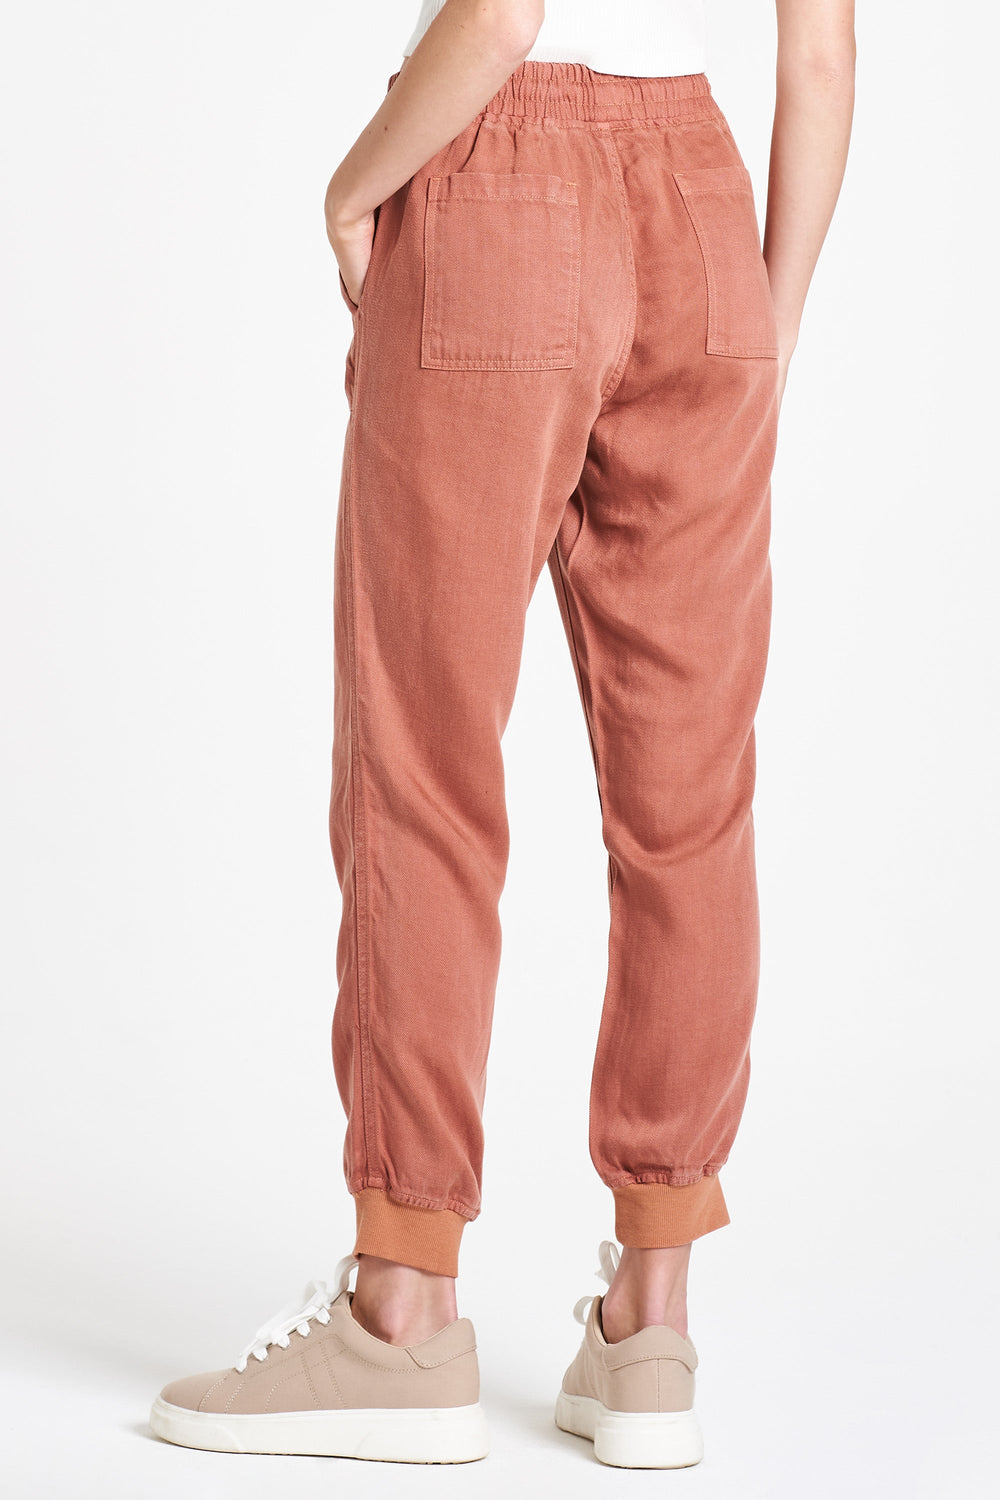 image of a female model wearing a JACEY SUPER HIGH RISE CROPPED JOGGER PANTS WISTFUL MAUVE PANTS